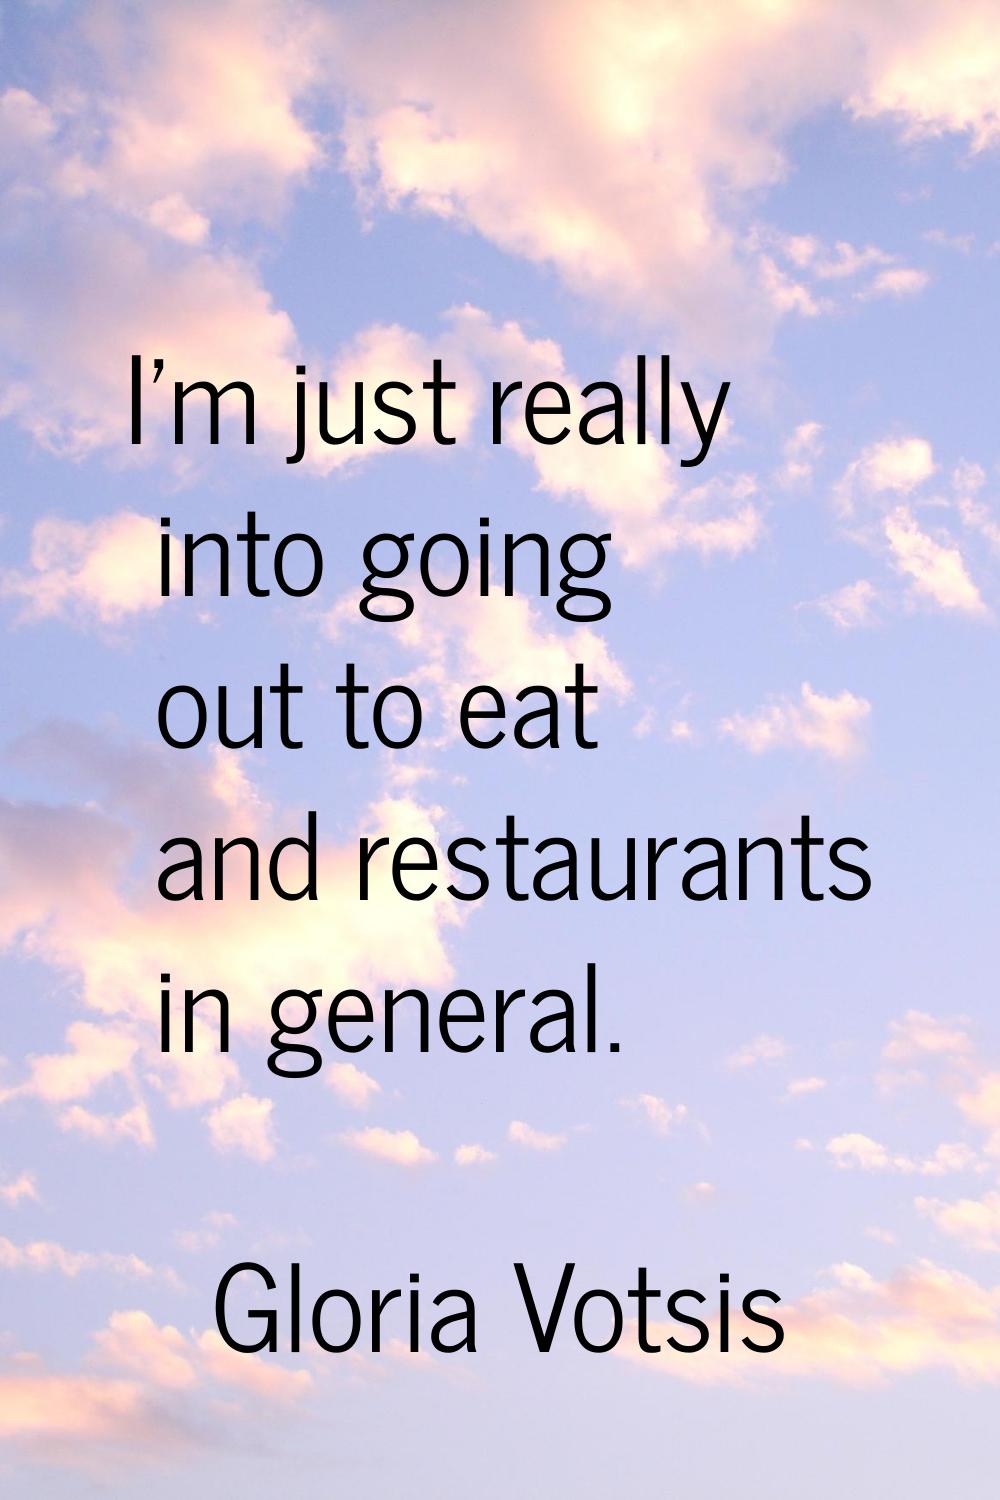 I'm just really into going out to eat and restaurants in general.